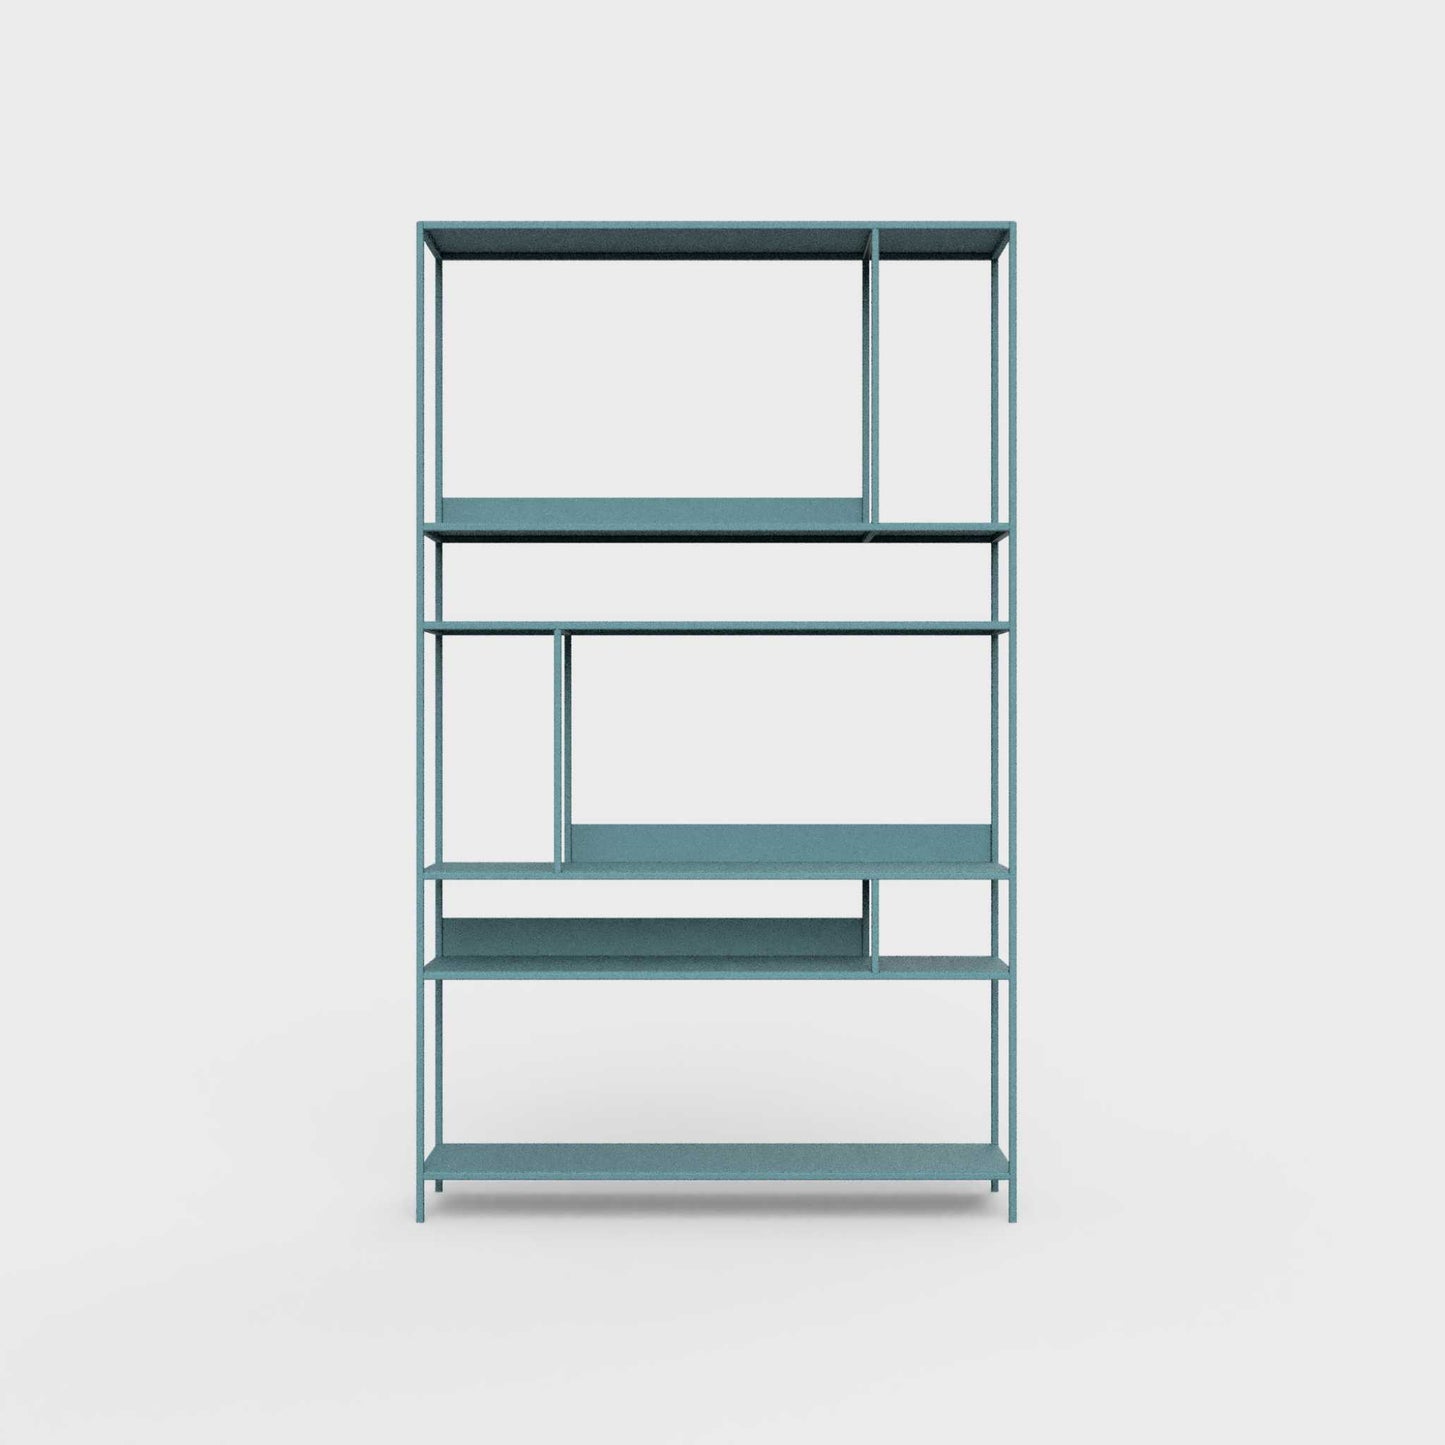 ÉTAUDORÉ Floks 01 powder coated steel bookcase in turquoise blue / green